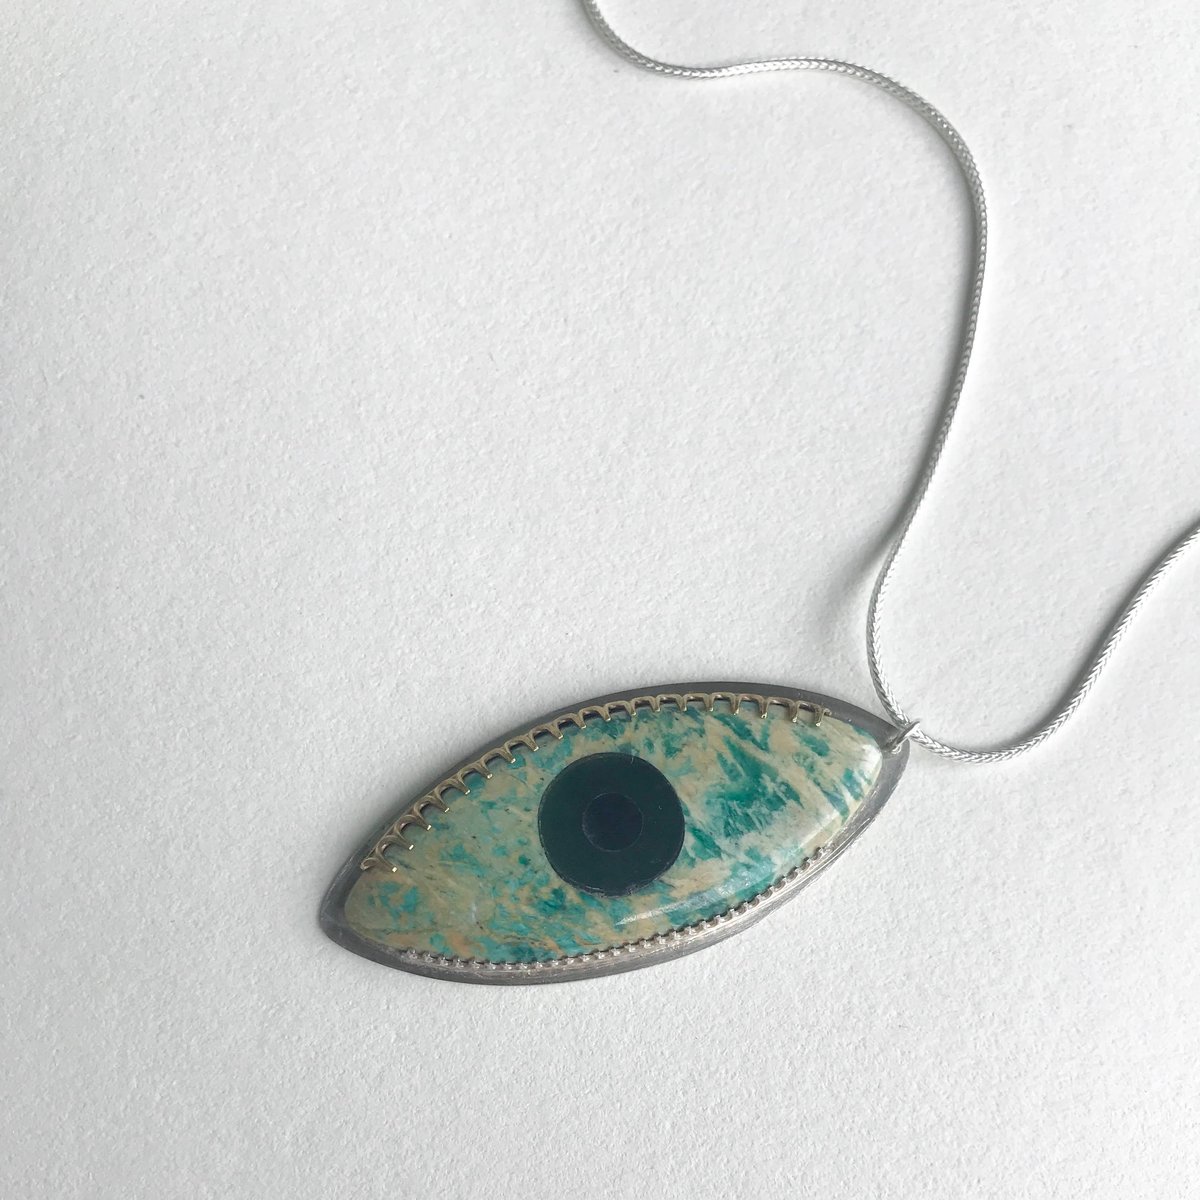 Image of Green Eye Necklace